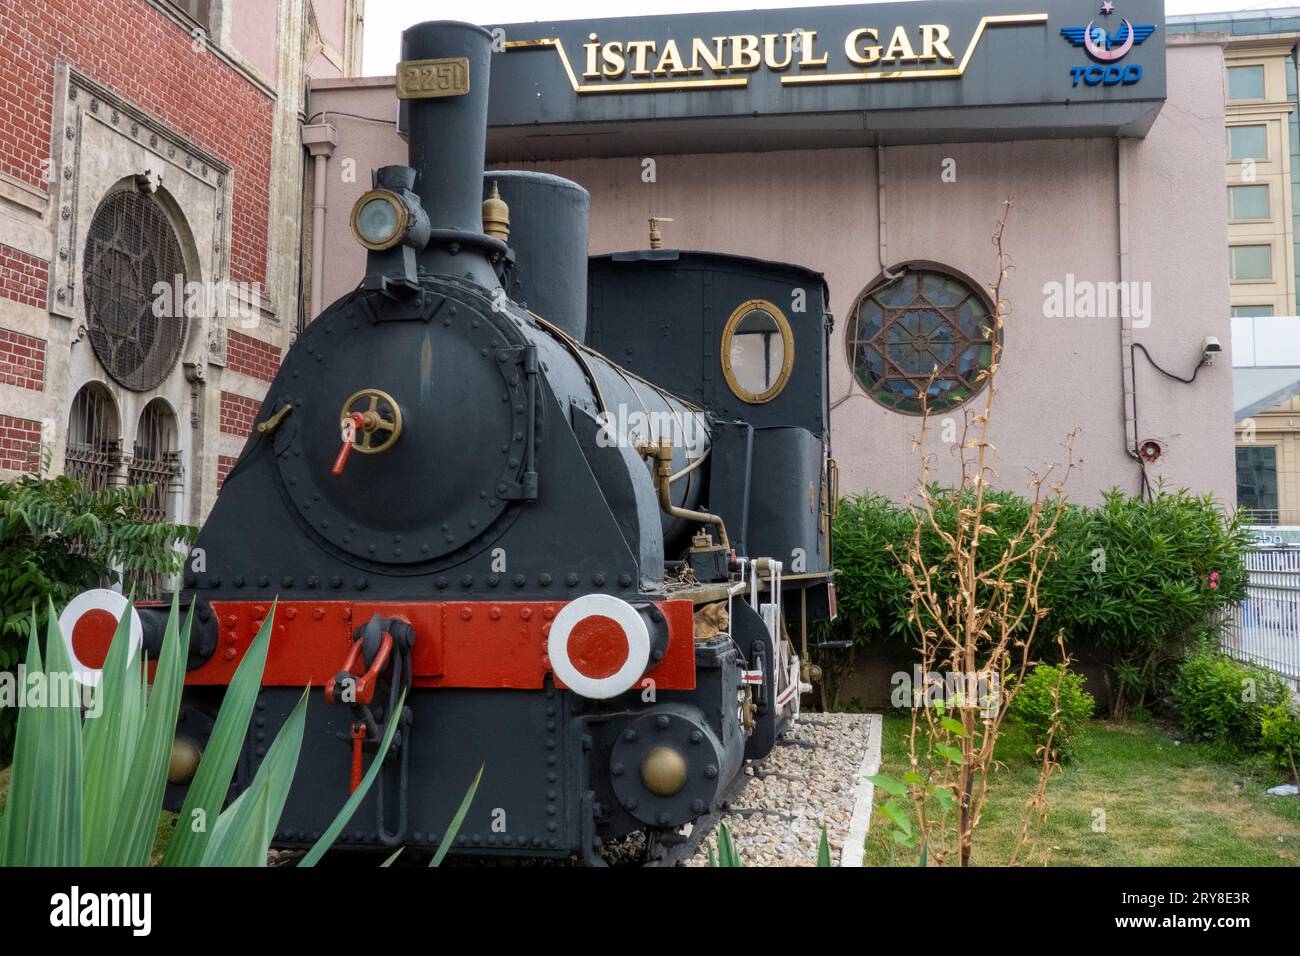 Turkey Istanbul Railway Museum. Artifacts  displays related to the nation's railroads, including relics from the Orient Express. Stock Photo